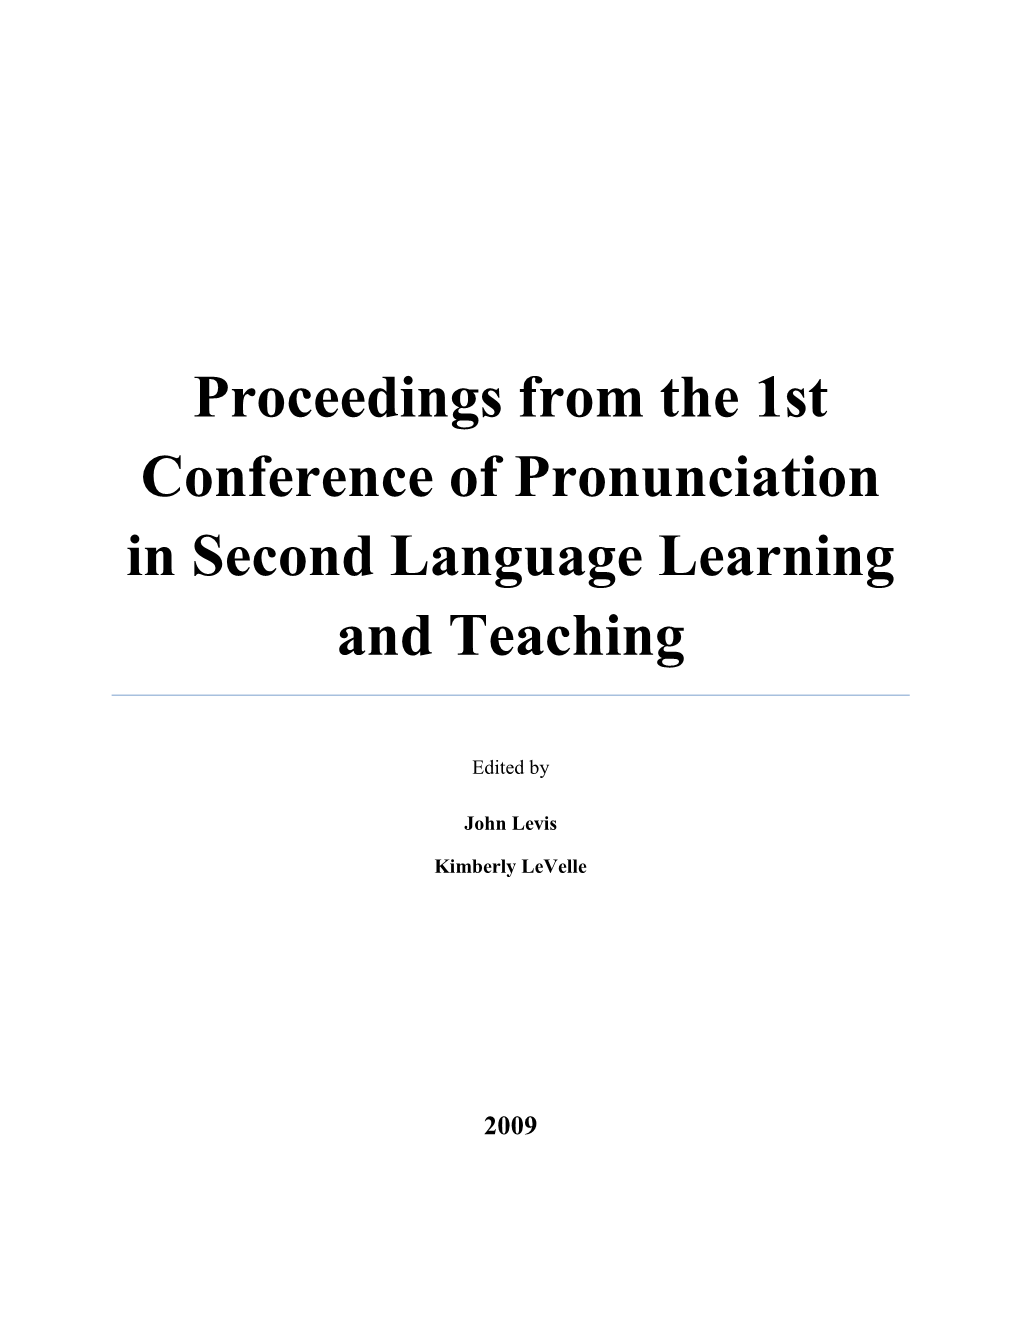 Proceedings from the 1St Conference of Pronunciation in Second Language Learning and Teaching